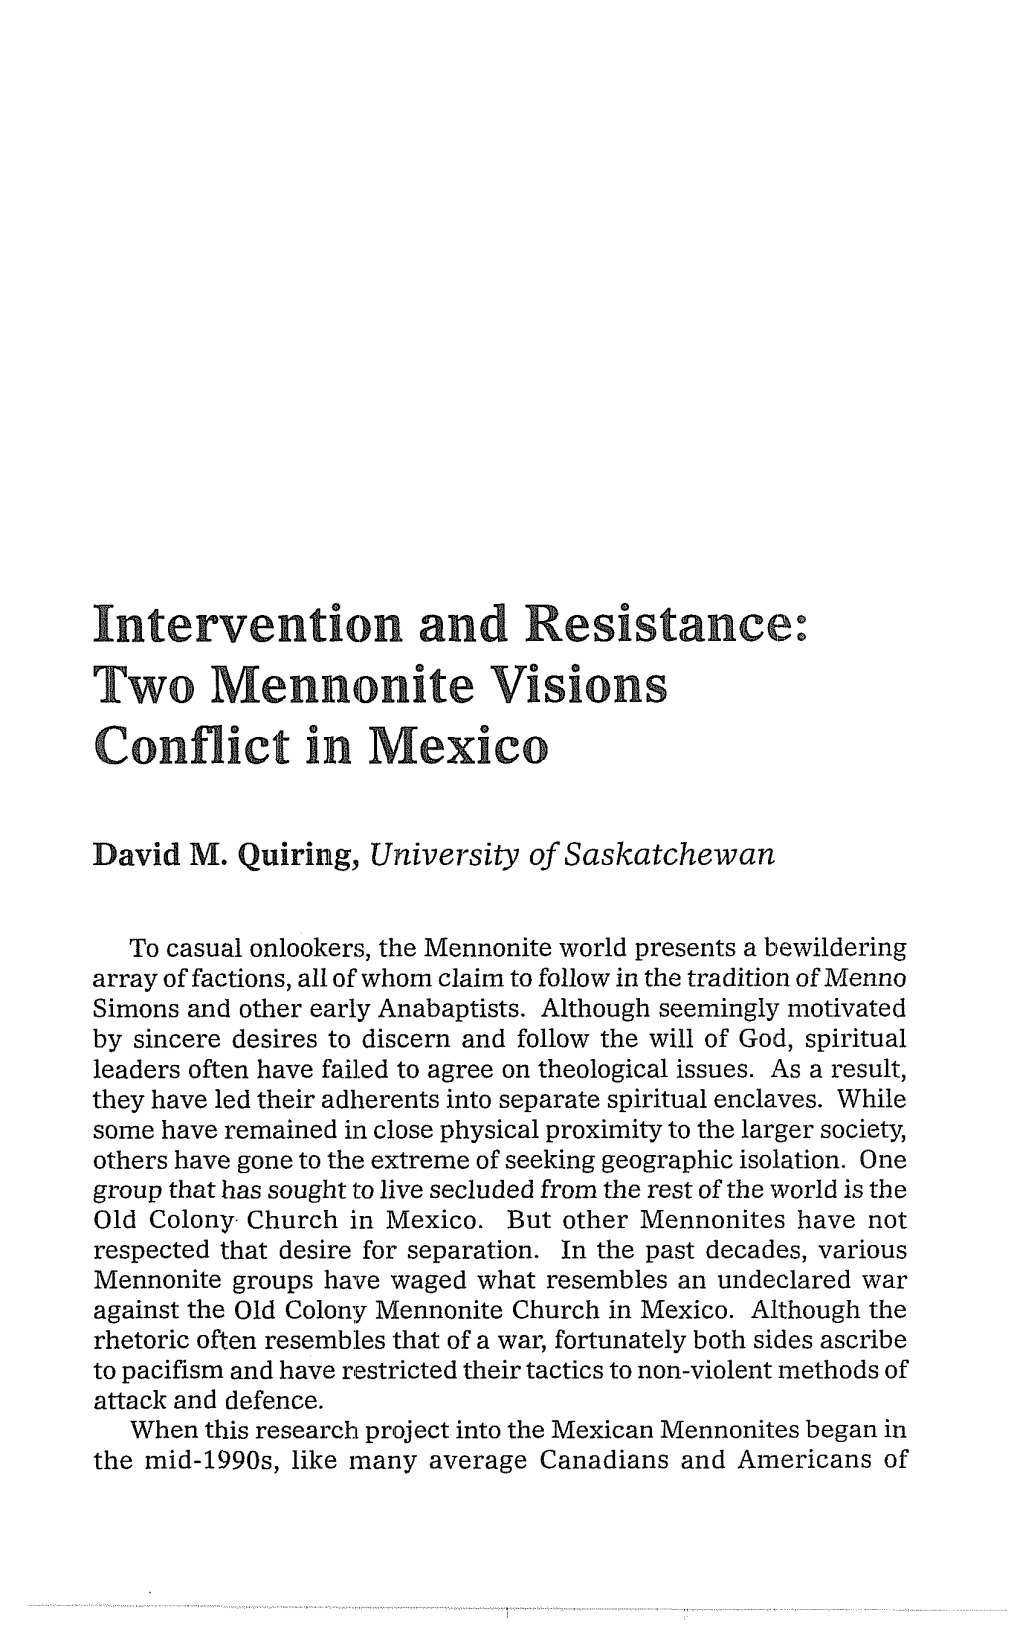 Intervention and Resistance: Two Mennonite Visions Conflict in Mexico